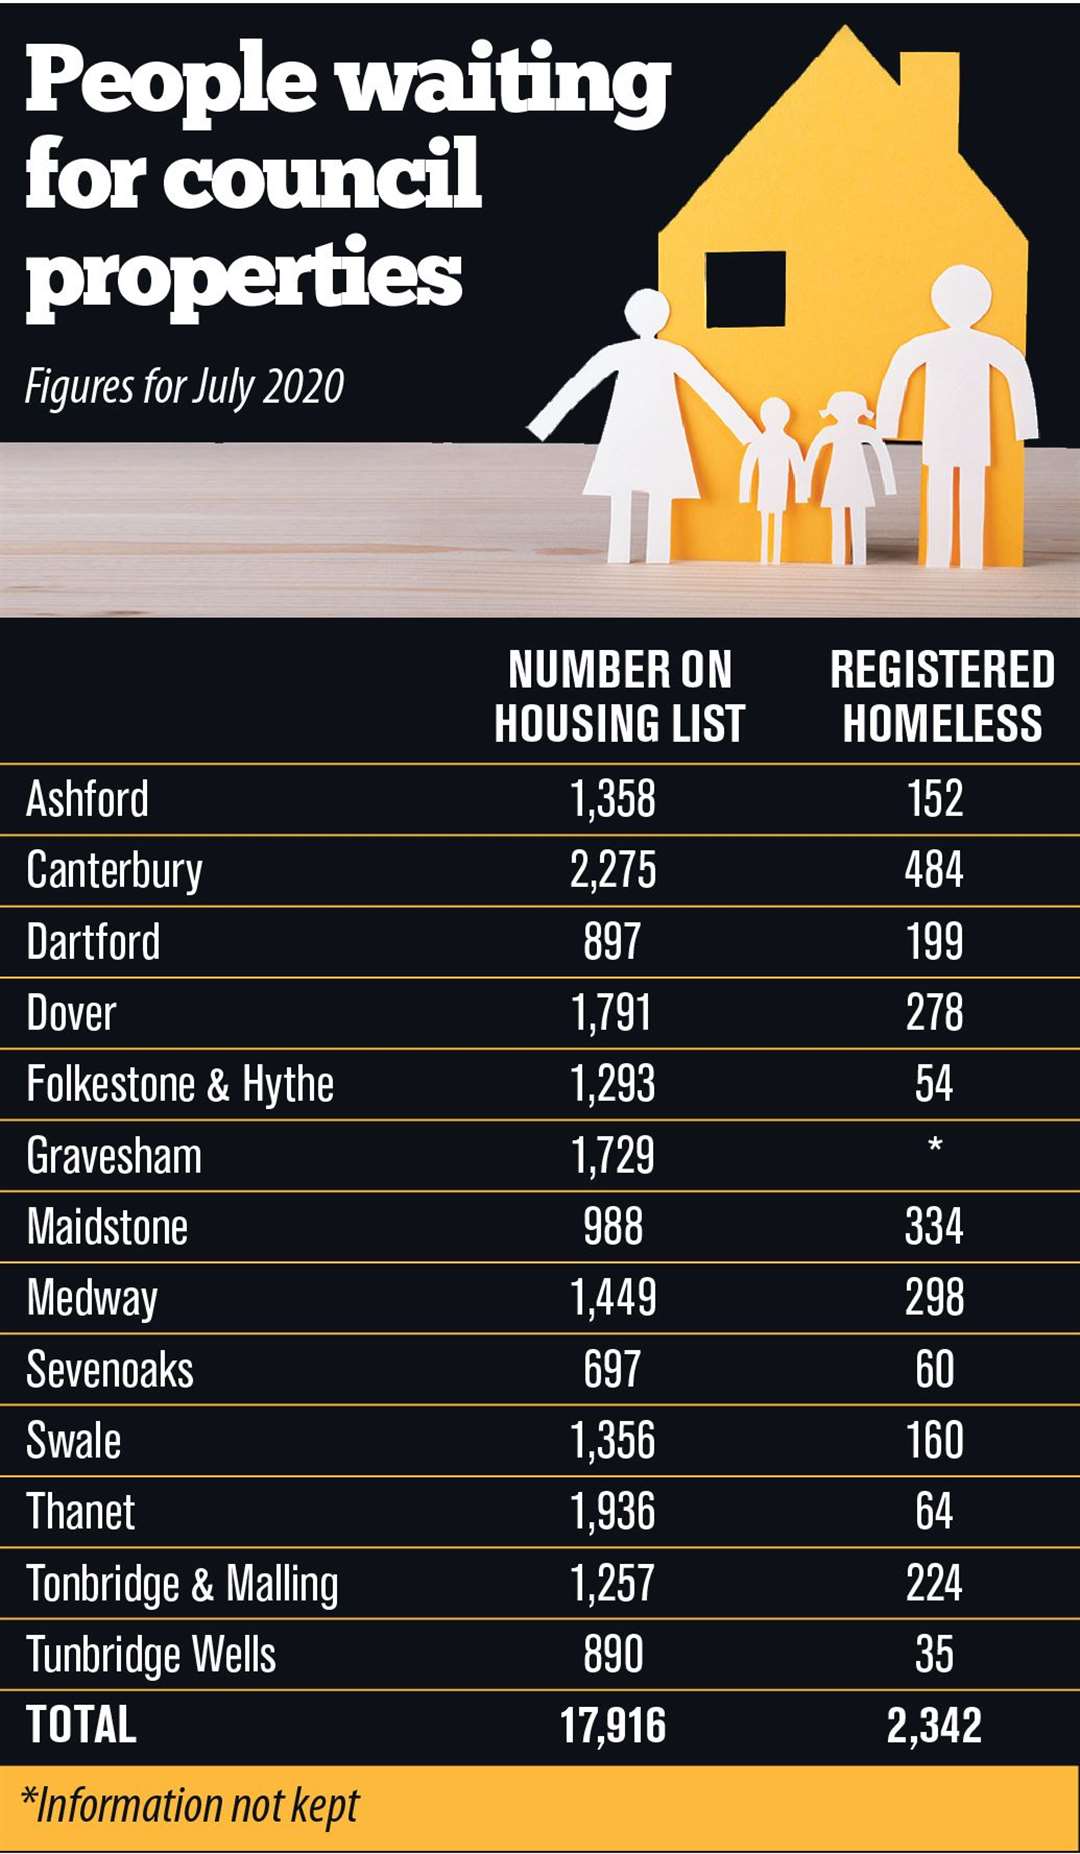 The number of those waiting for a council property and the amount of homeless people in Kent as of July 2020